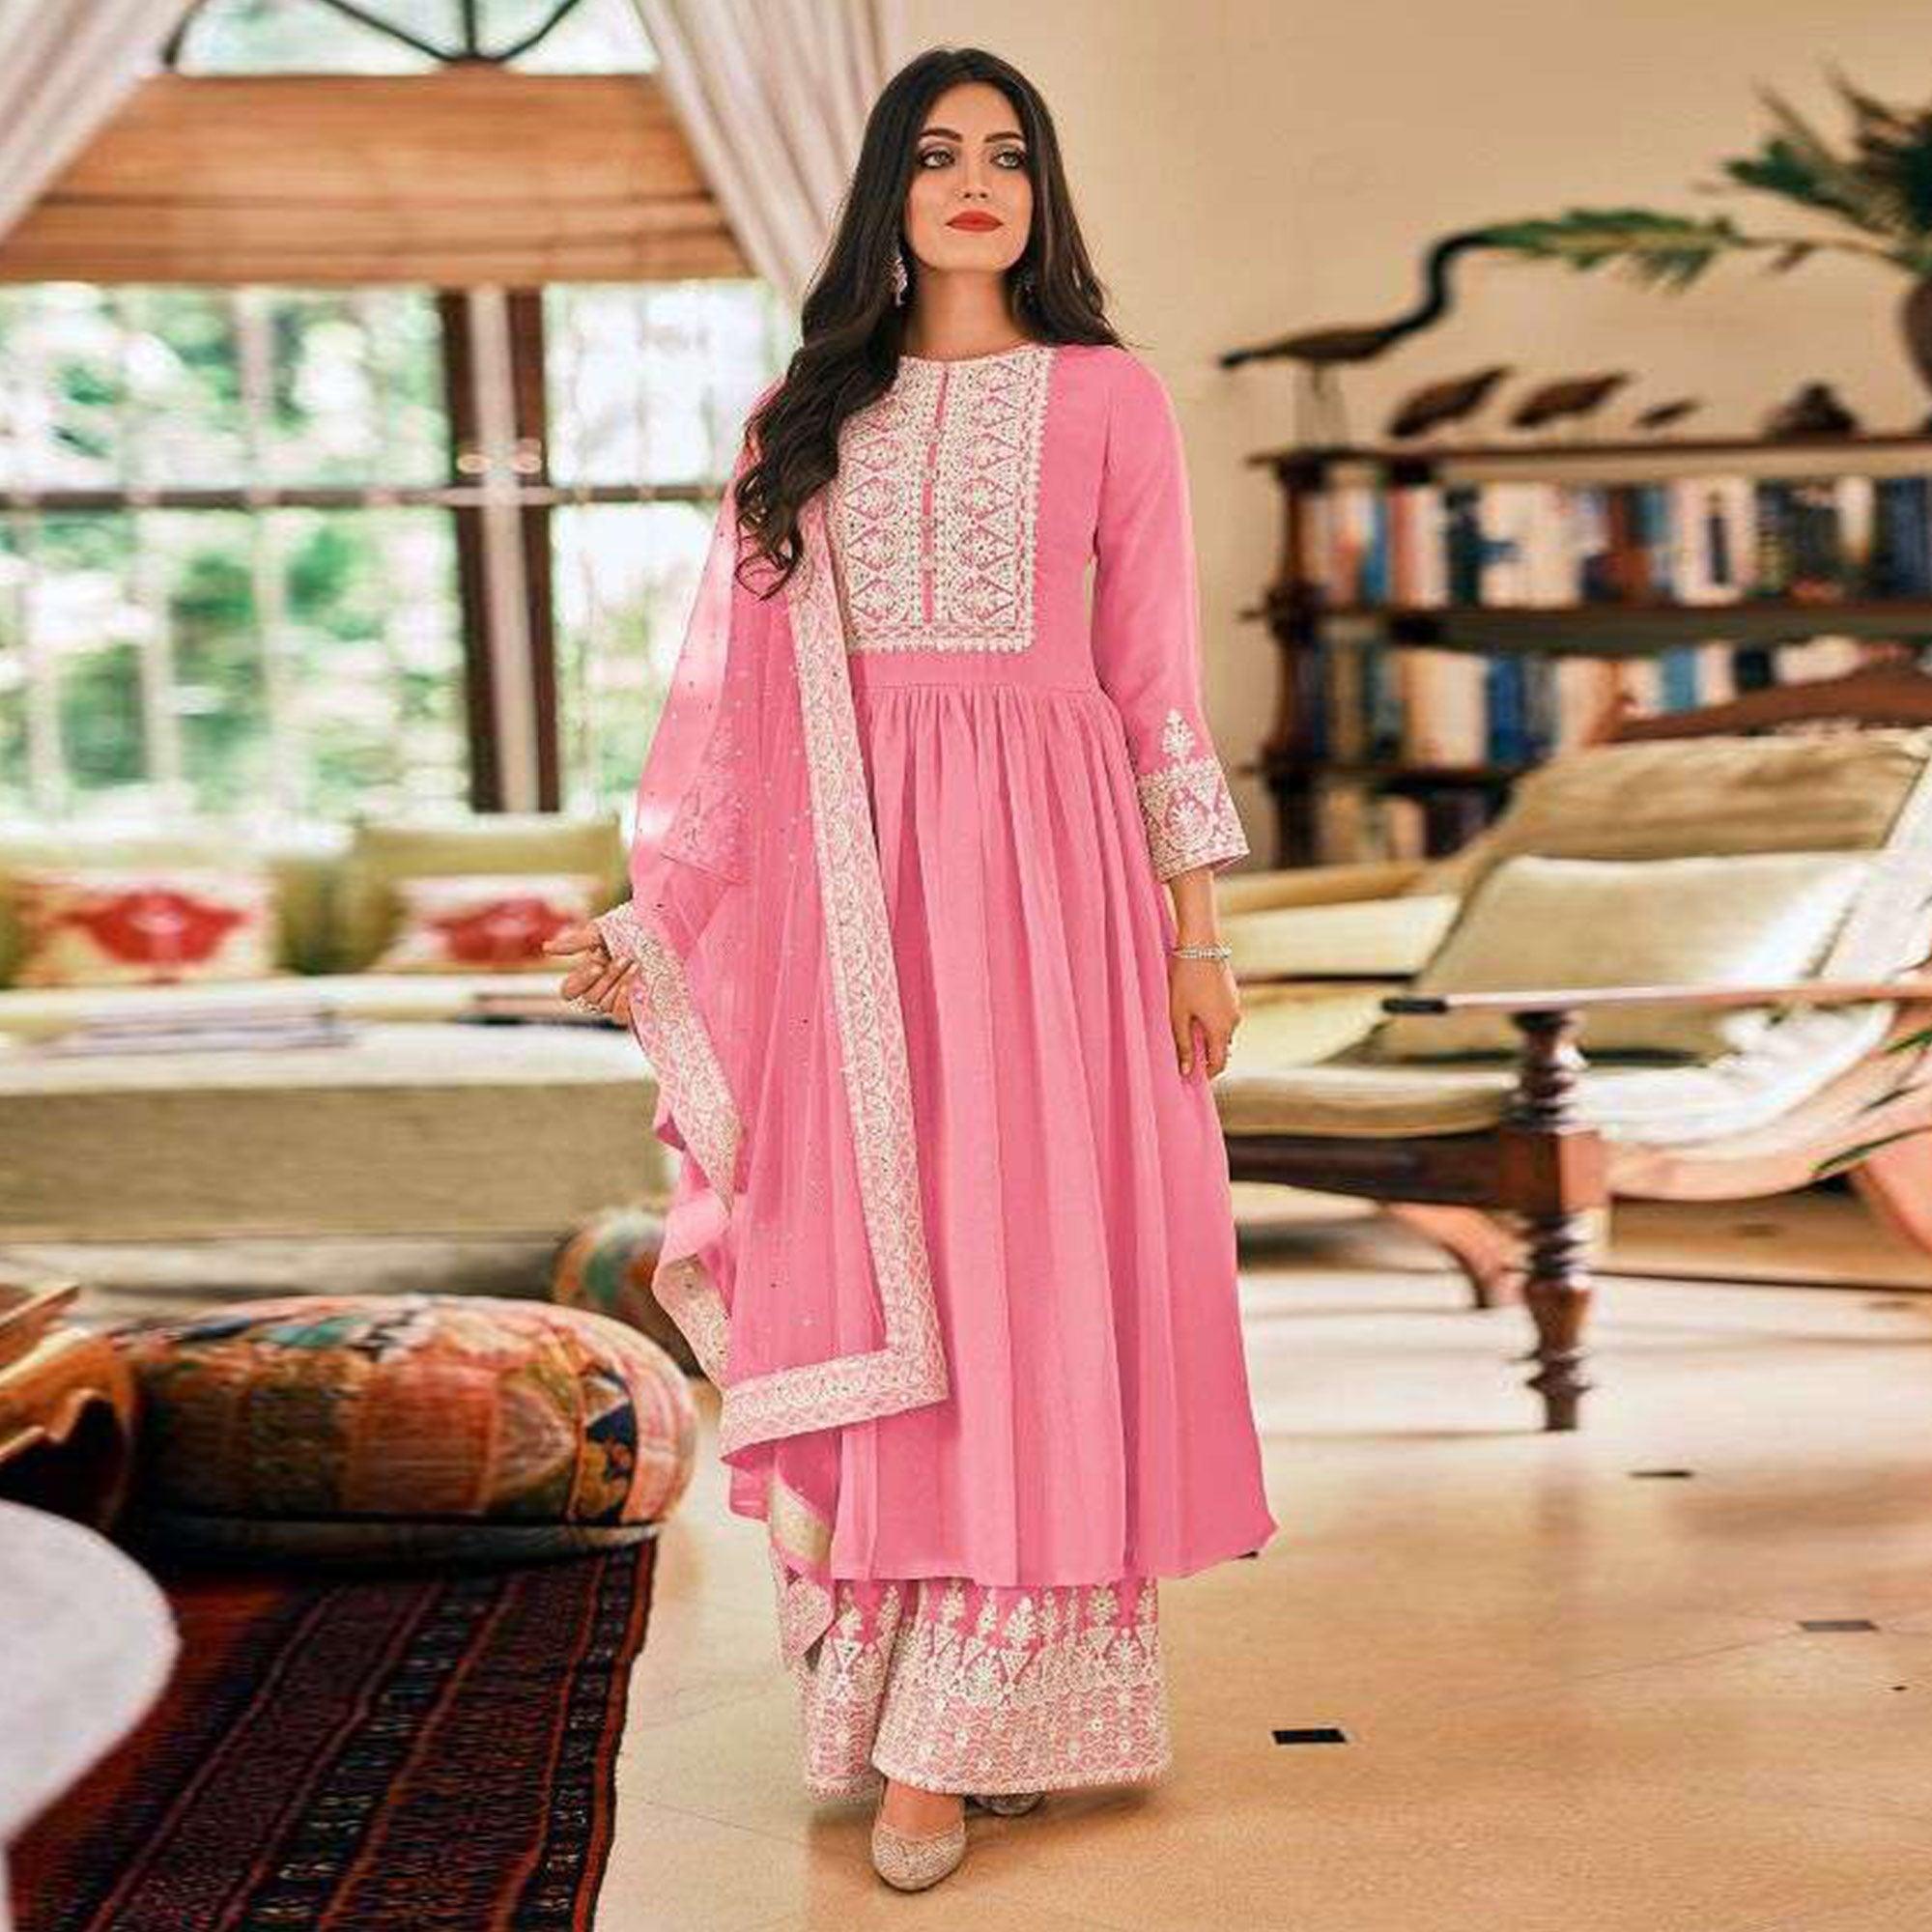 Designer Pink Cotton Women's Suit for Formal Occasions and Office Wear –  Paris Deluxe